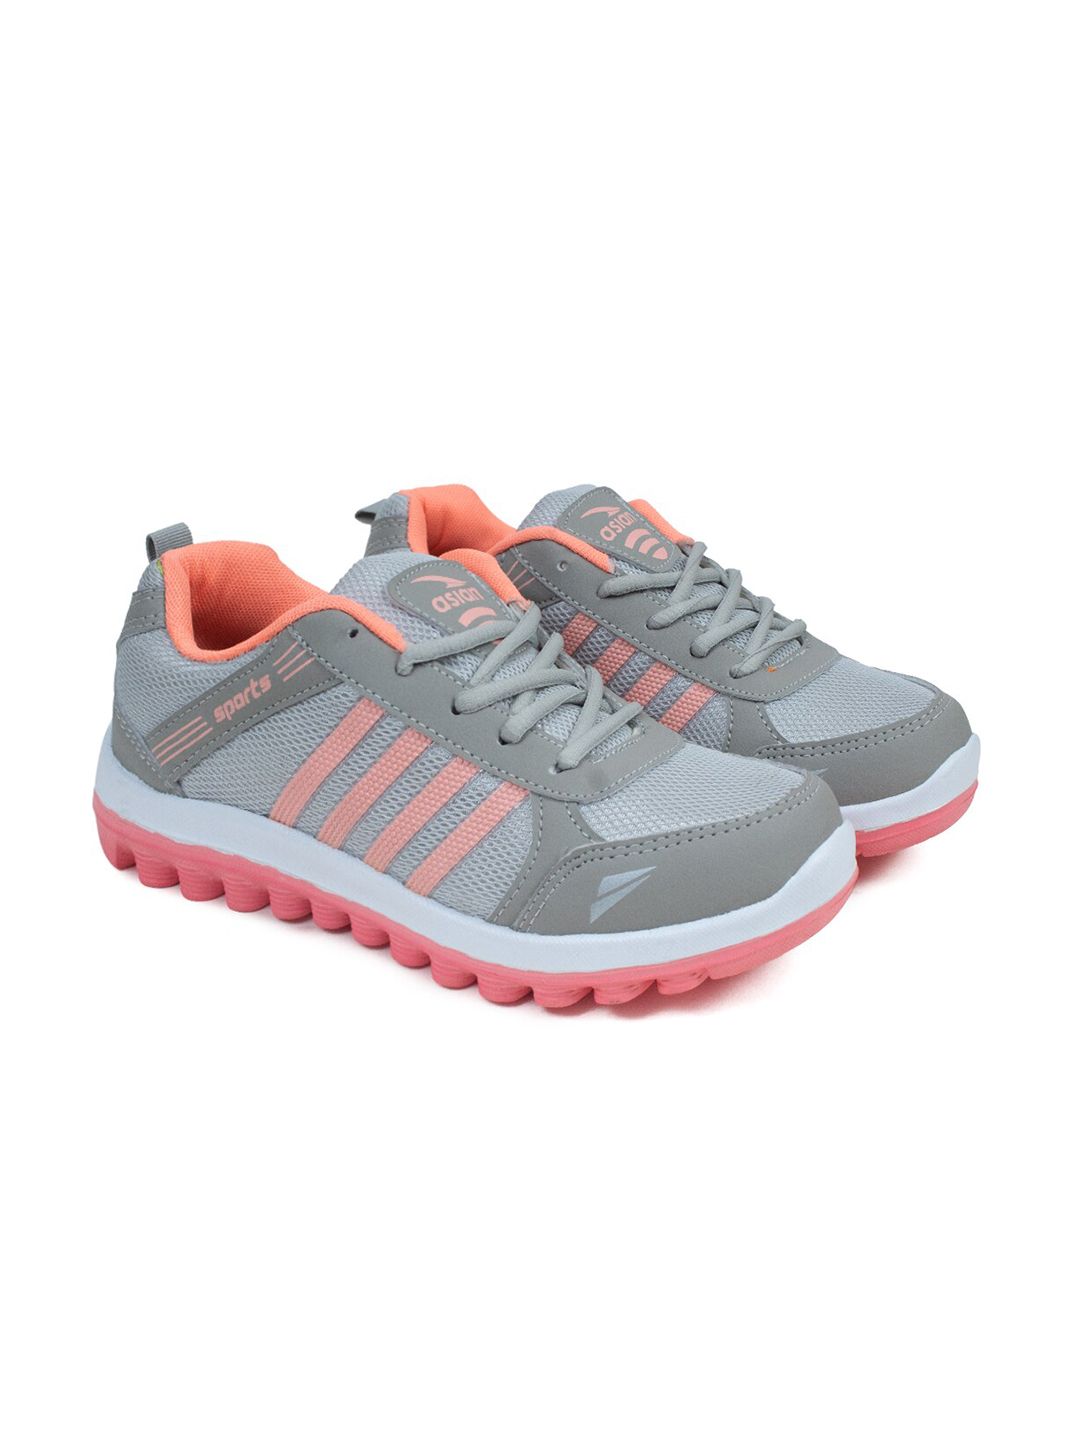 ASIAN Women Grey & Peach-Coloured Mesh Running Shoes Price in India